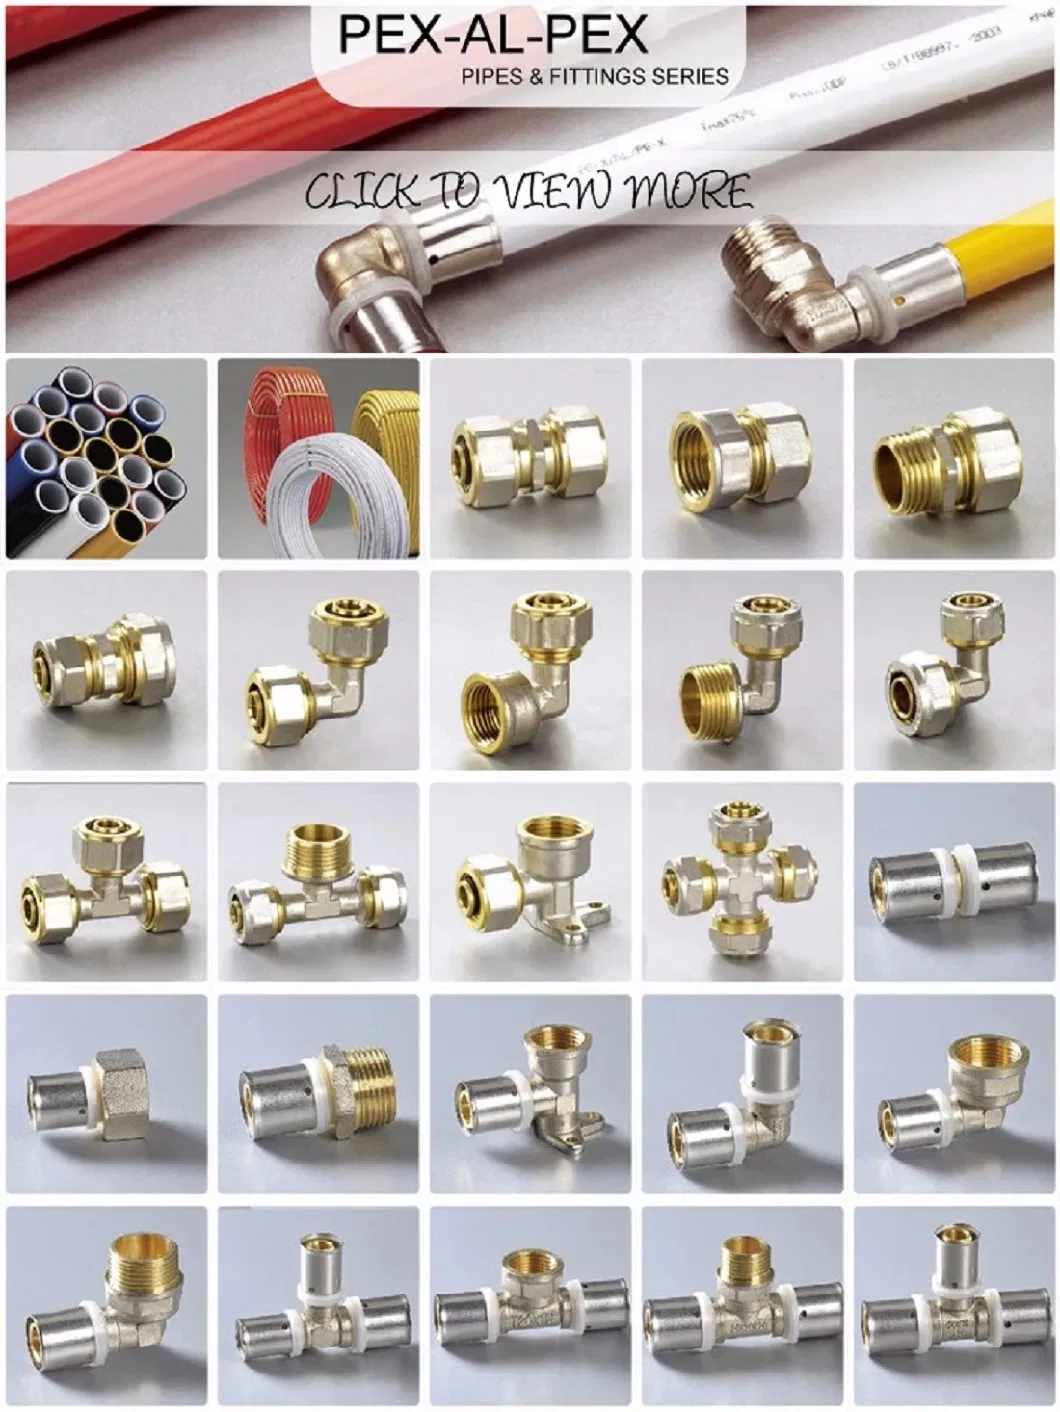 Plumbing Materials Underfloor Heating System Straight Male Plumbing Screw Socket Coupling Pipe Fittings Pex Brass Compression Fitting